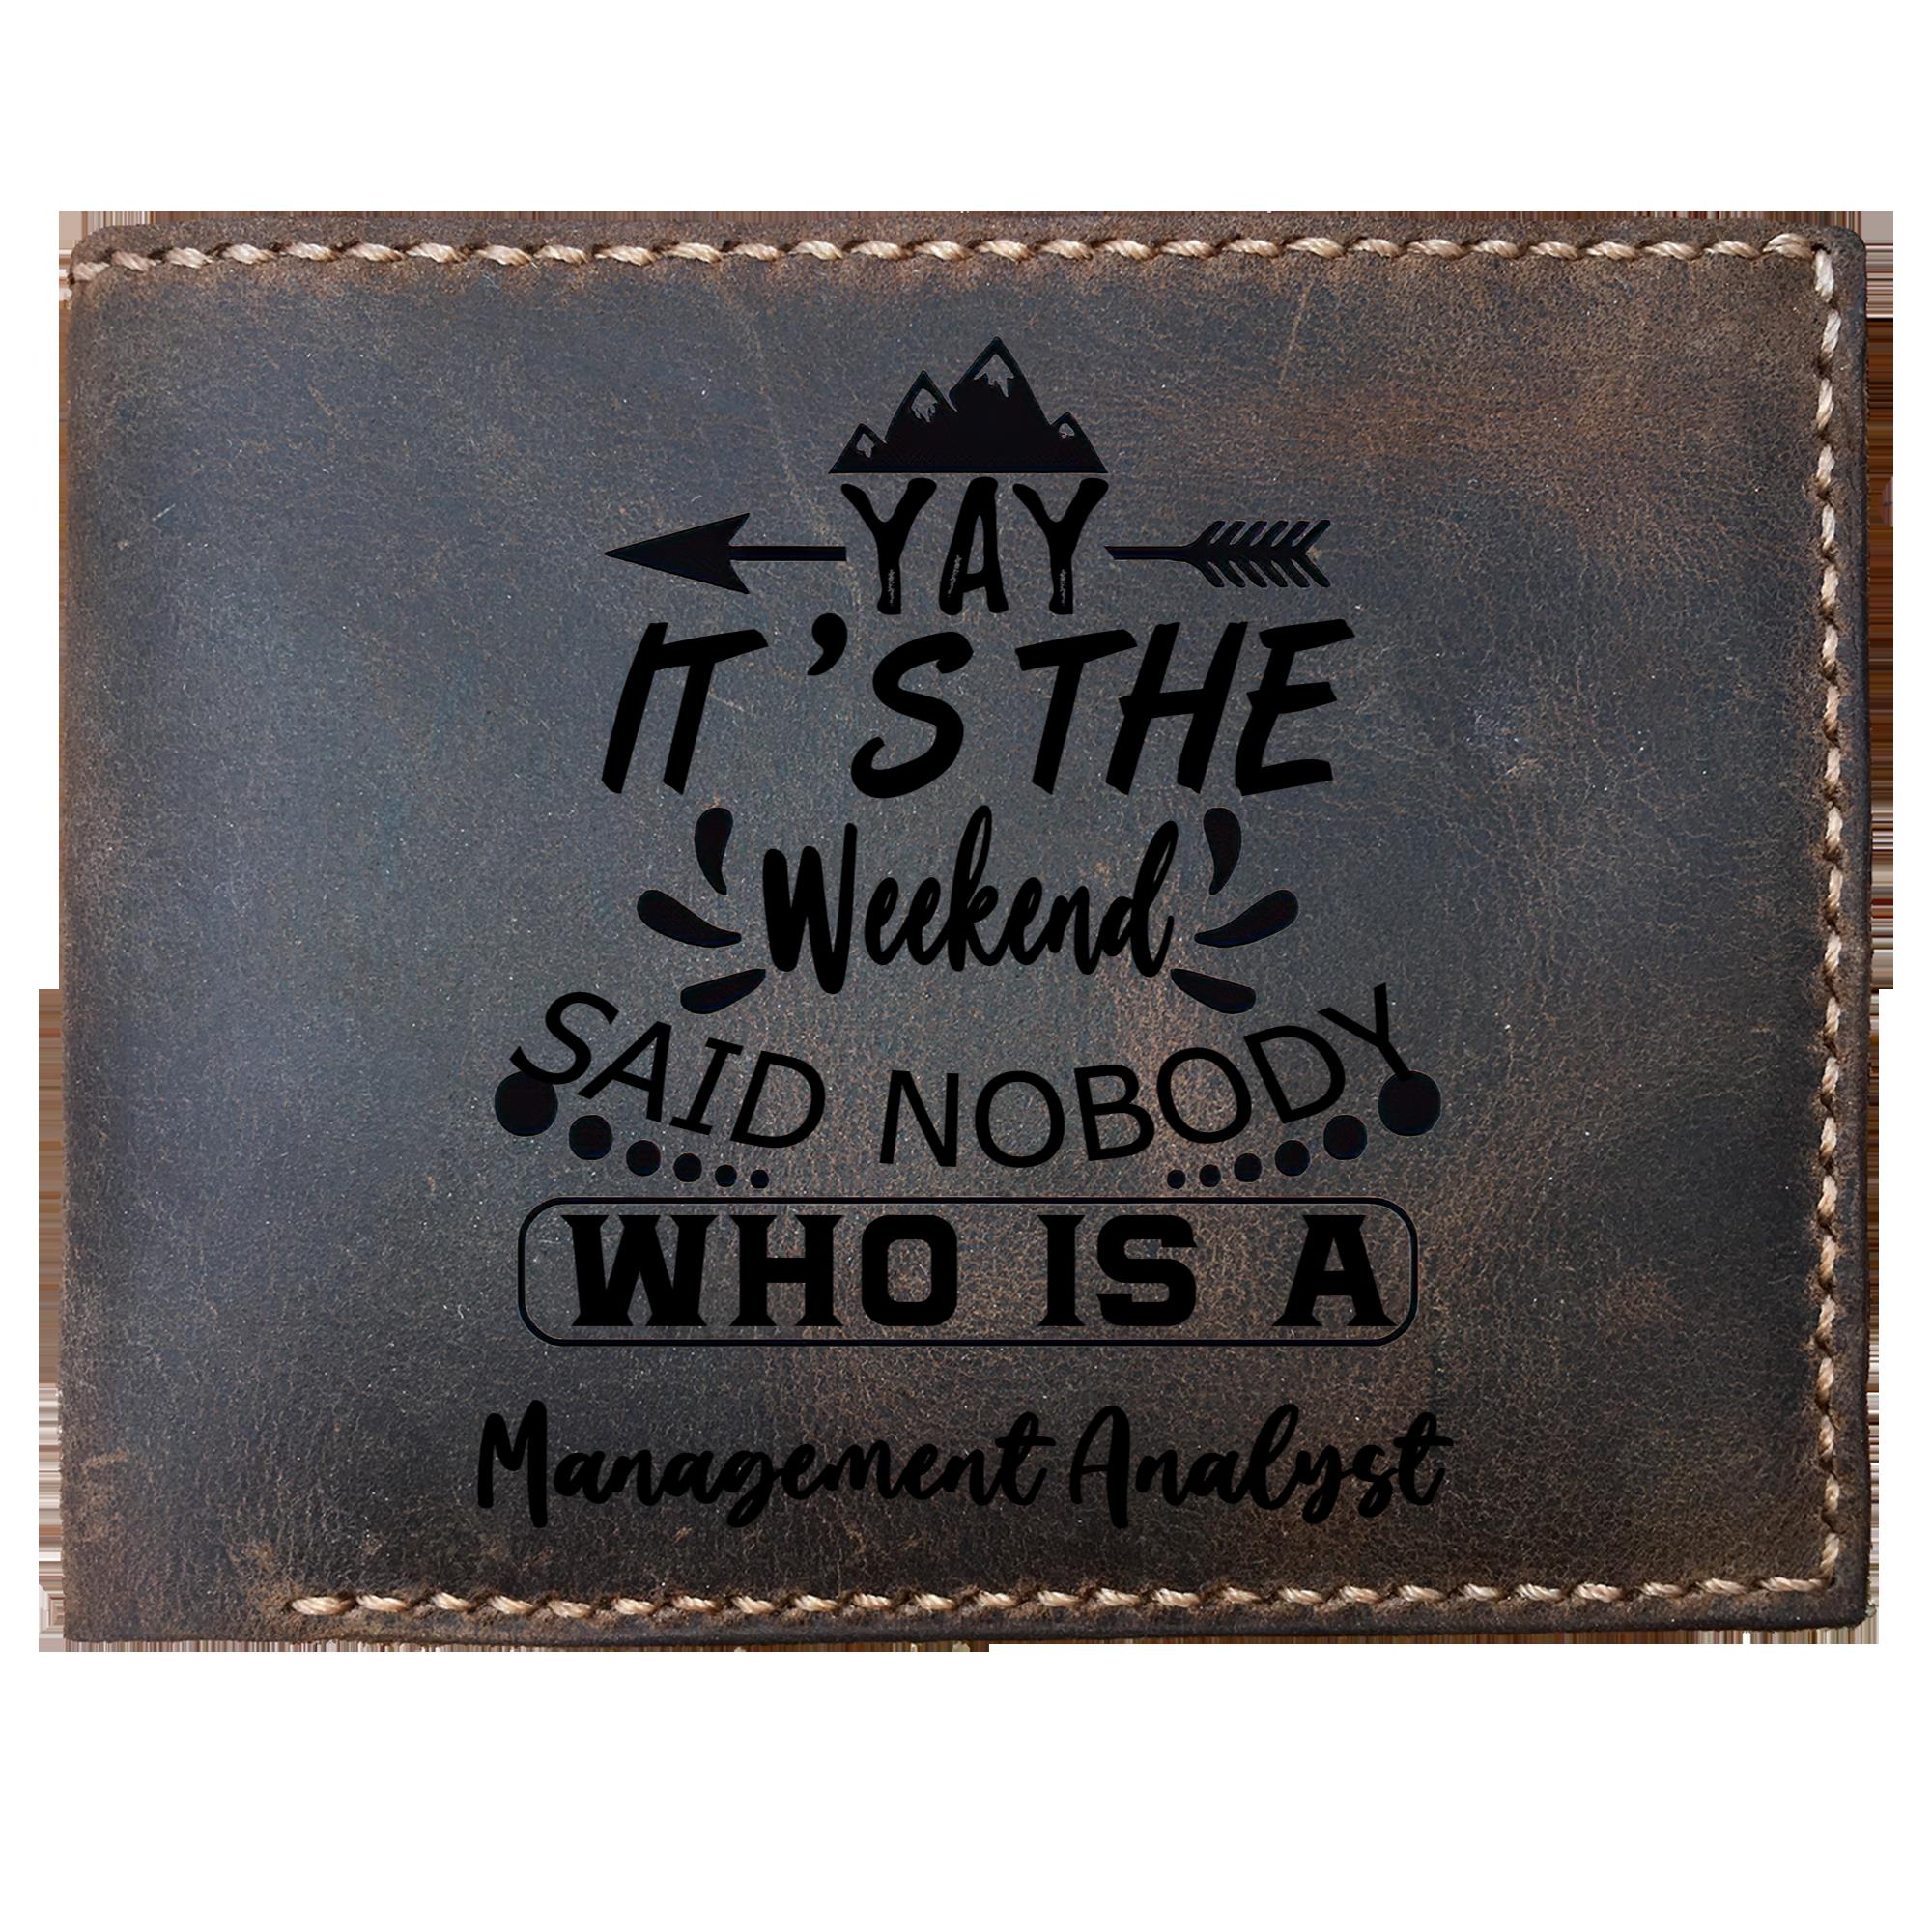 Skitongifts Funny Custom Laser Engraved Bifold Leather Wallet For Men, It's The Weekend Said Nobody Who Is A Management Analyst, Father's Day Gifts